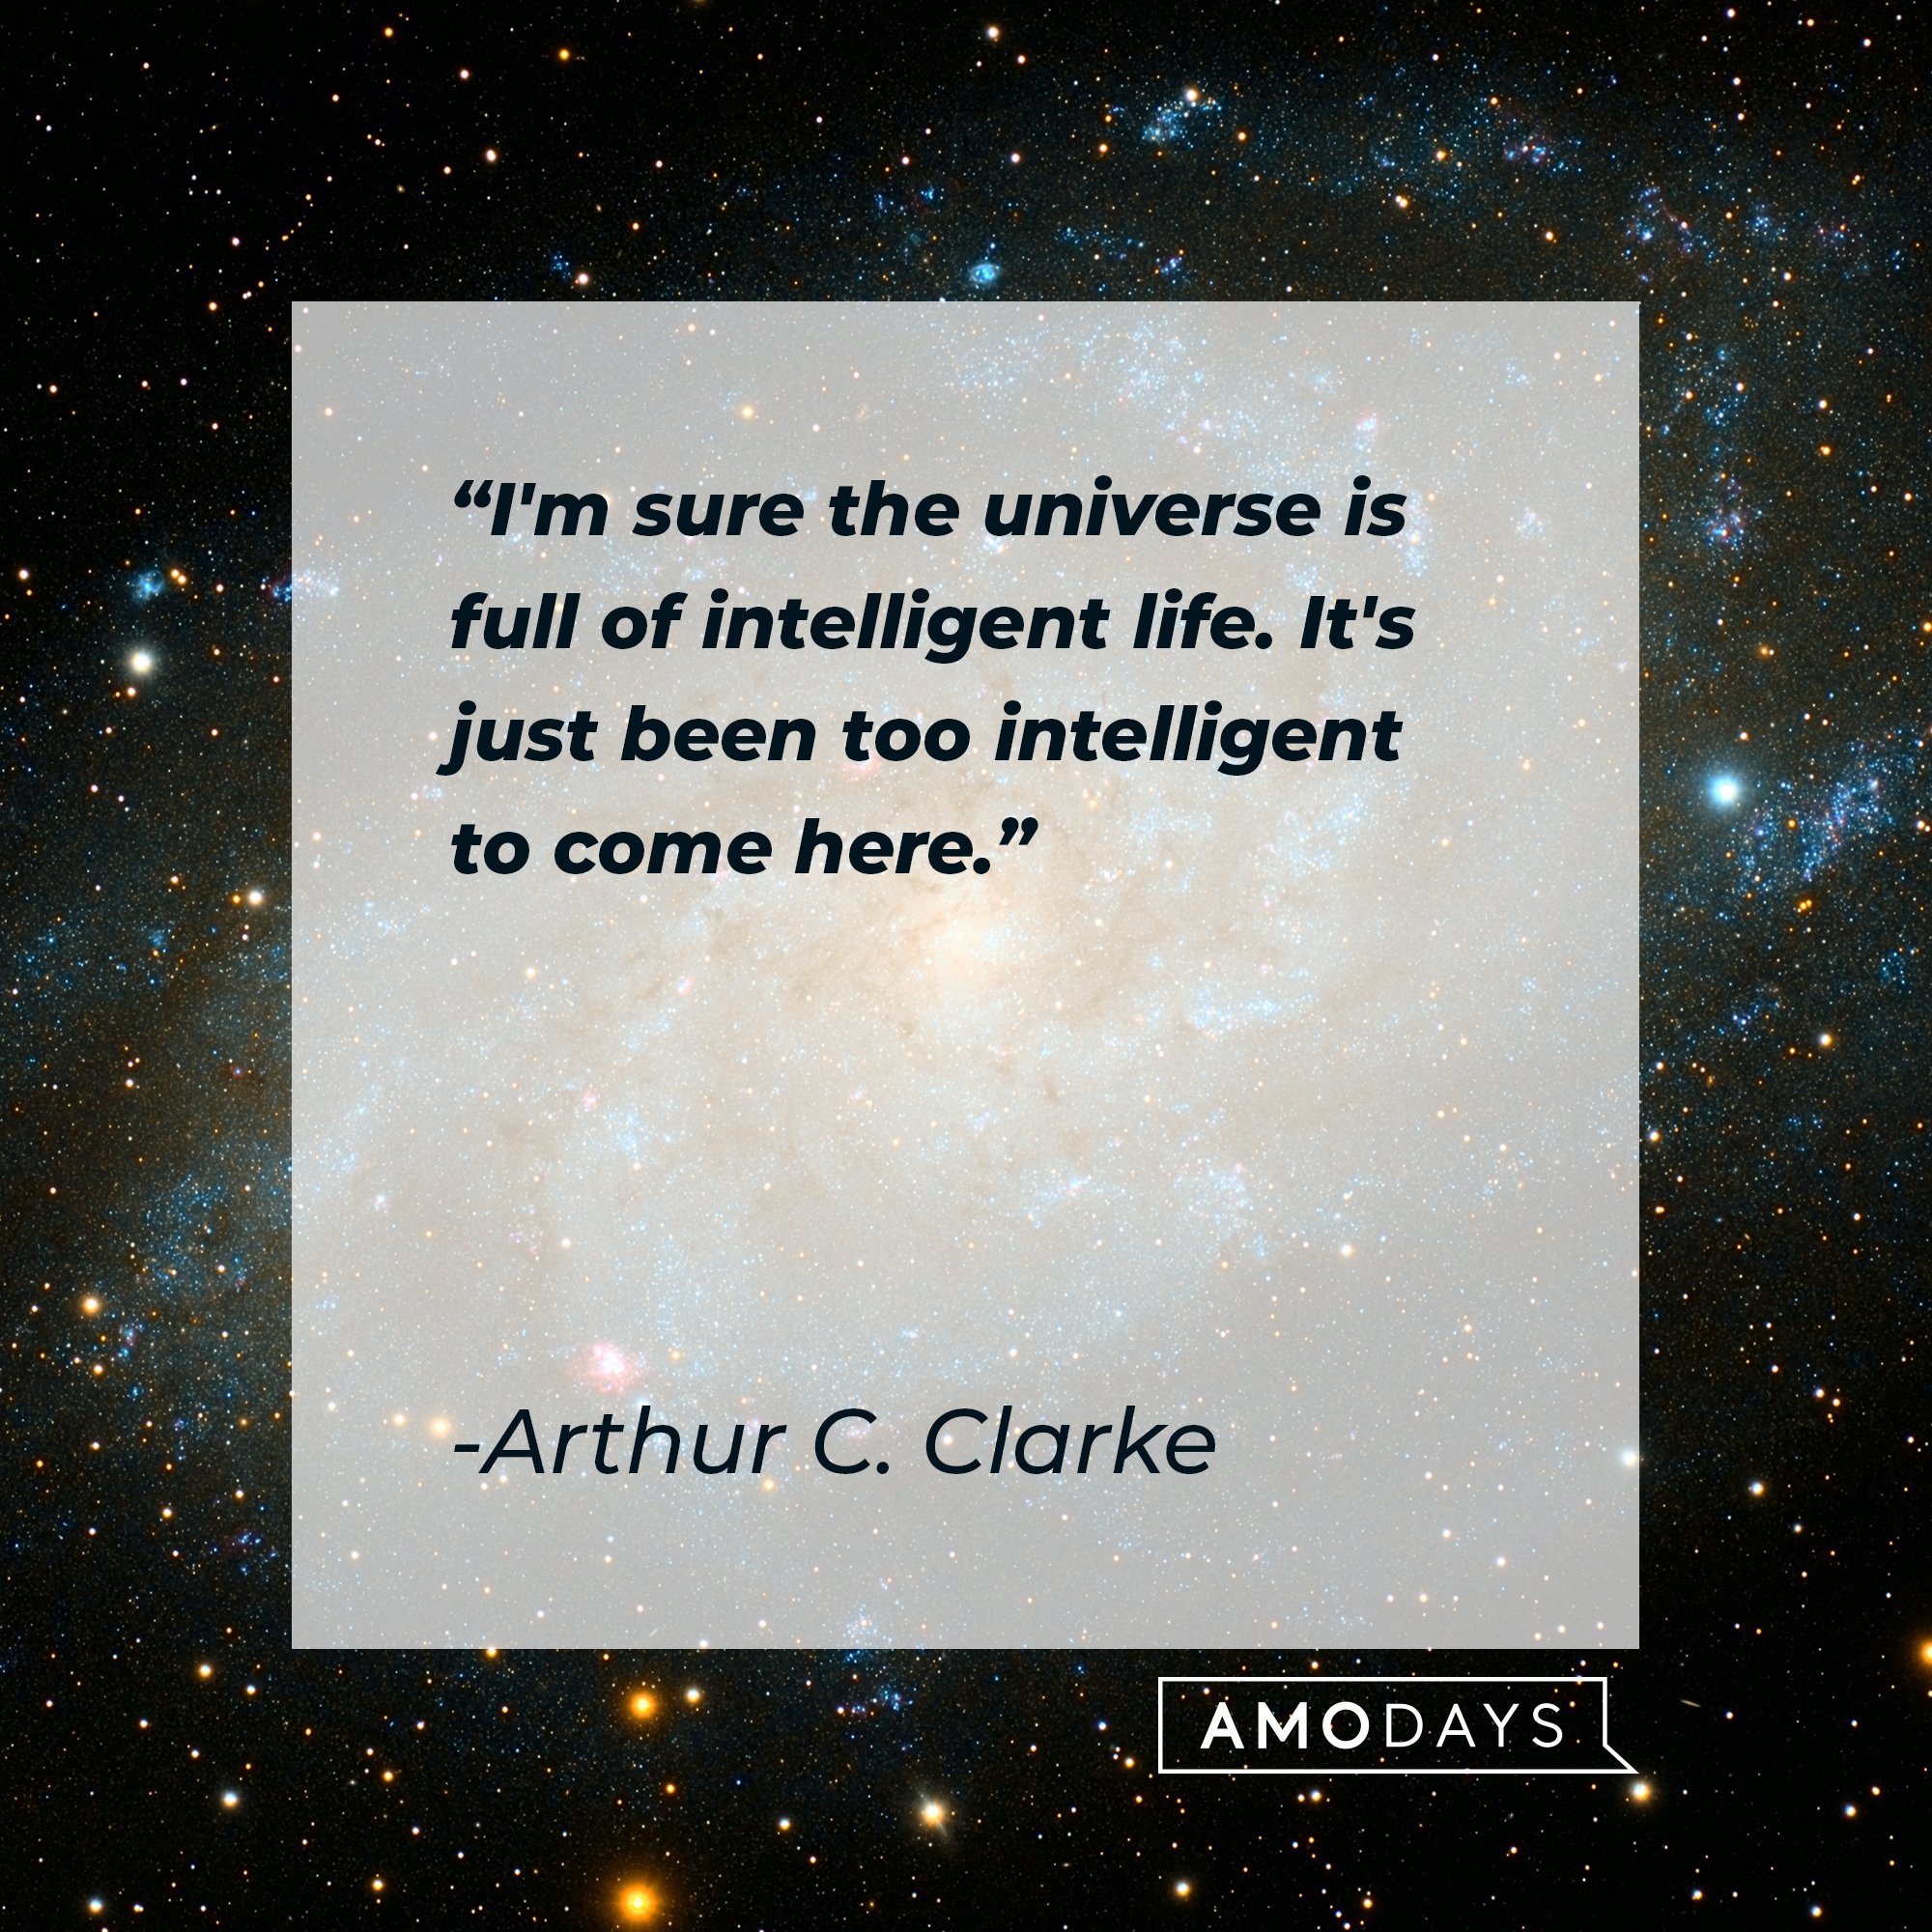 Arthur C. Clarke’s quote: "I'm sure the universe is full of intelligent life. It's just been too intelligent to come here.” | Image: AmoDays